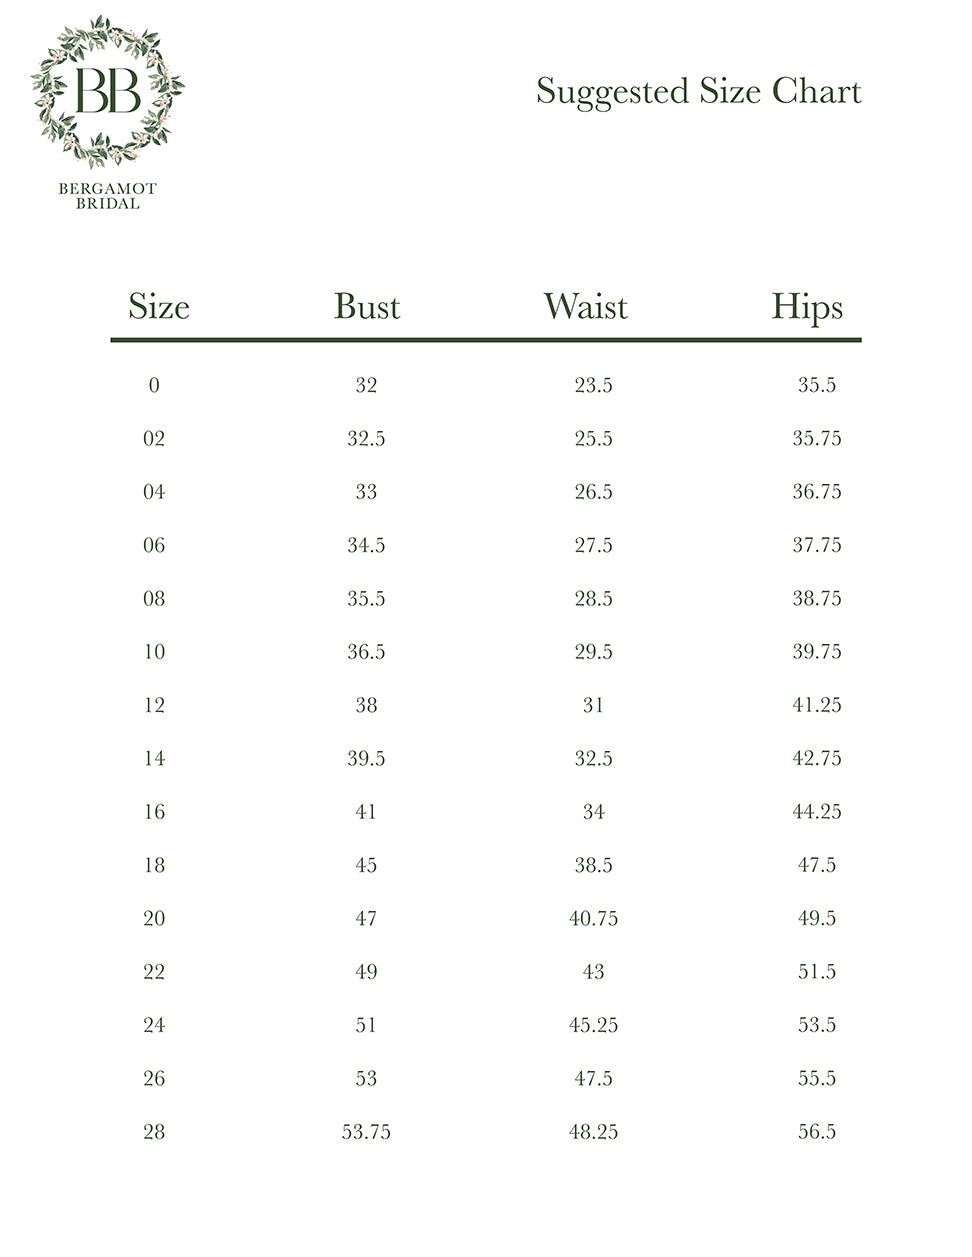 A chart showing the sizes of the Plunging Illusion Neckline with Beaded Lace A-line Wedding Dress by Bergamot Bridal.